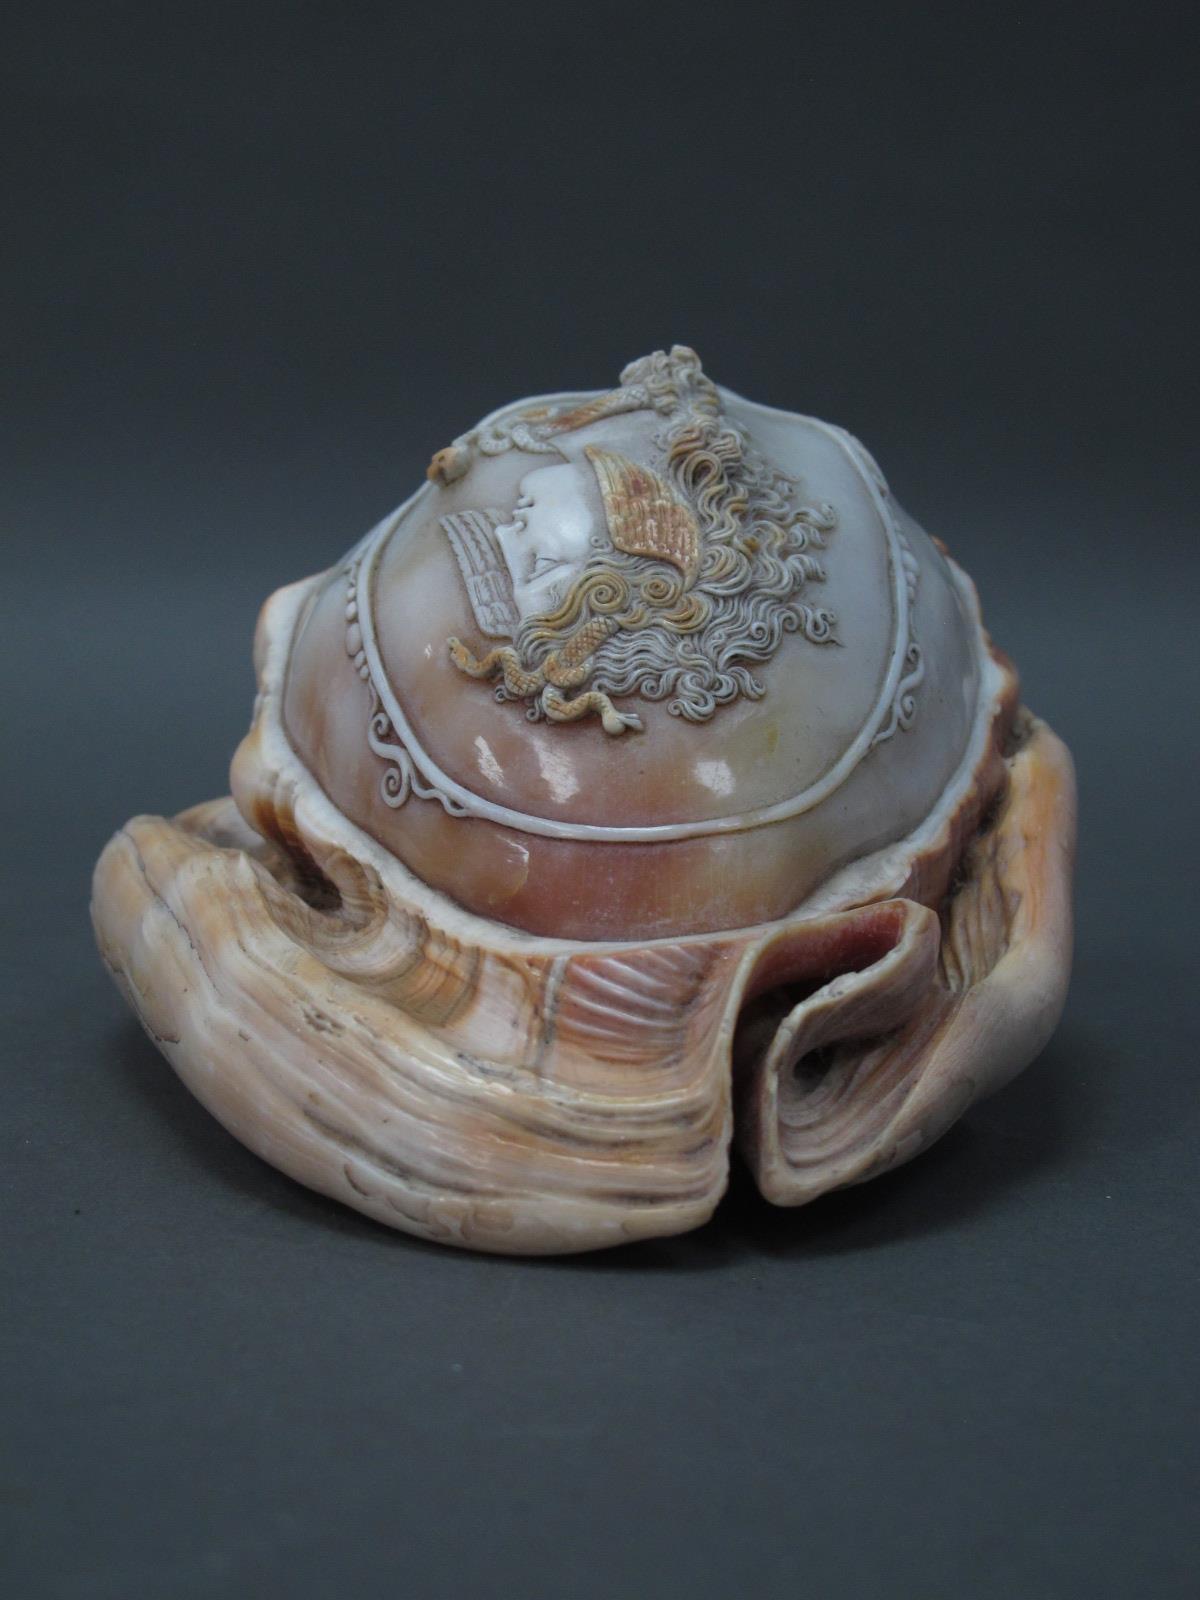 A Late XIX Century Cameo Carved Conch Shell, decorated with a portrait of Medusa, 14cm long. - Image 7 of 7